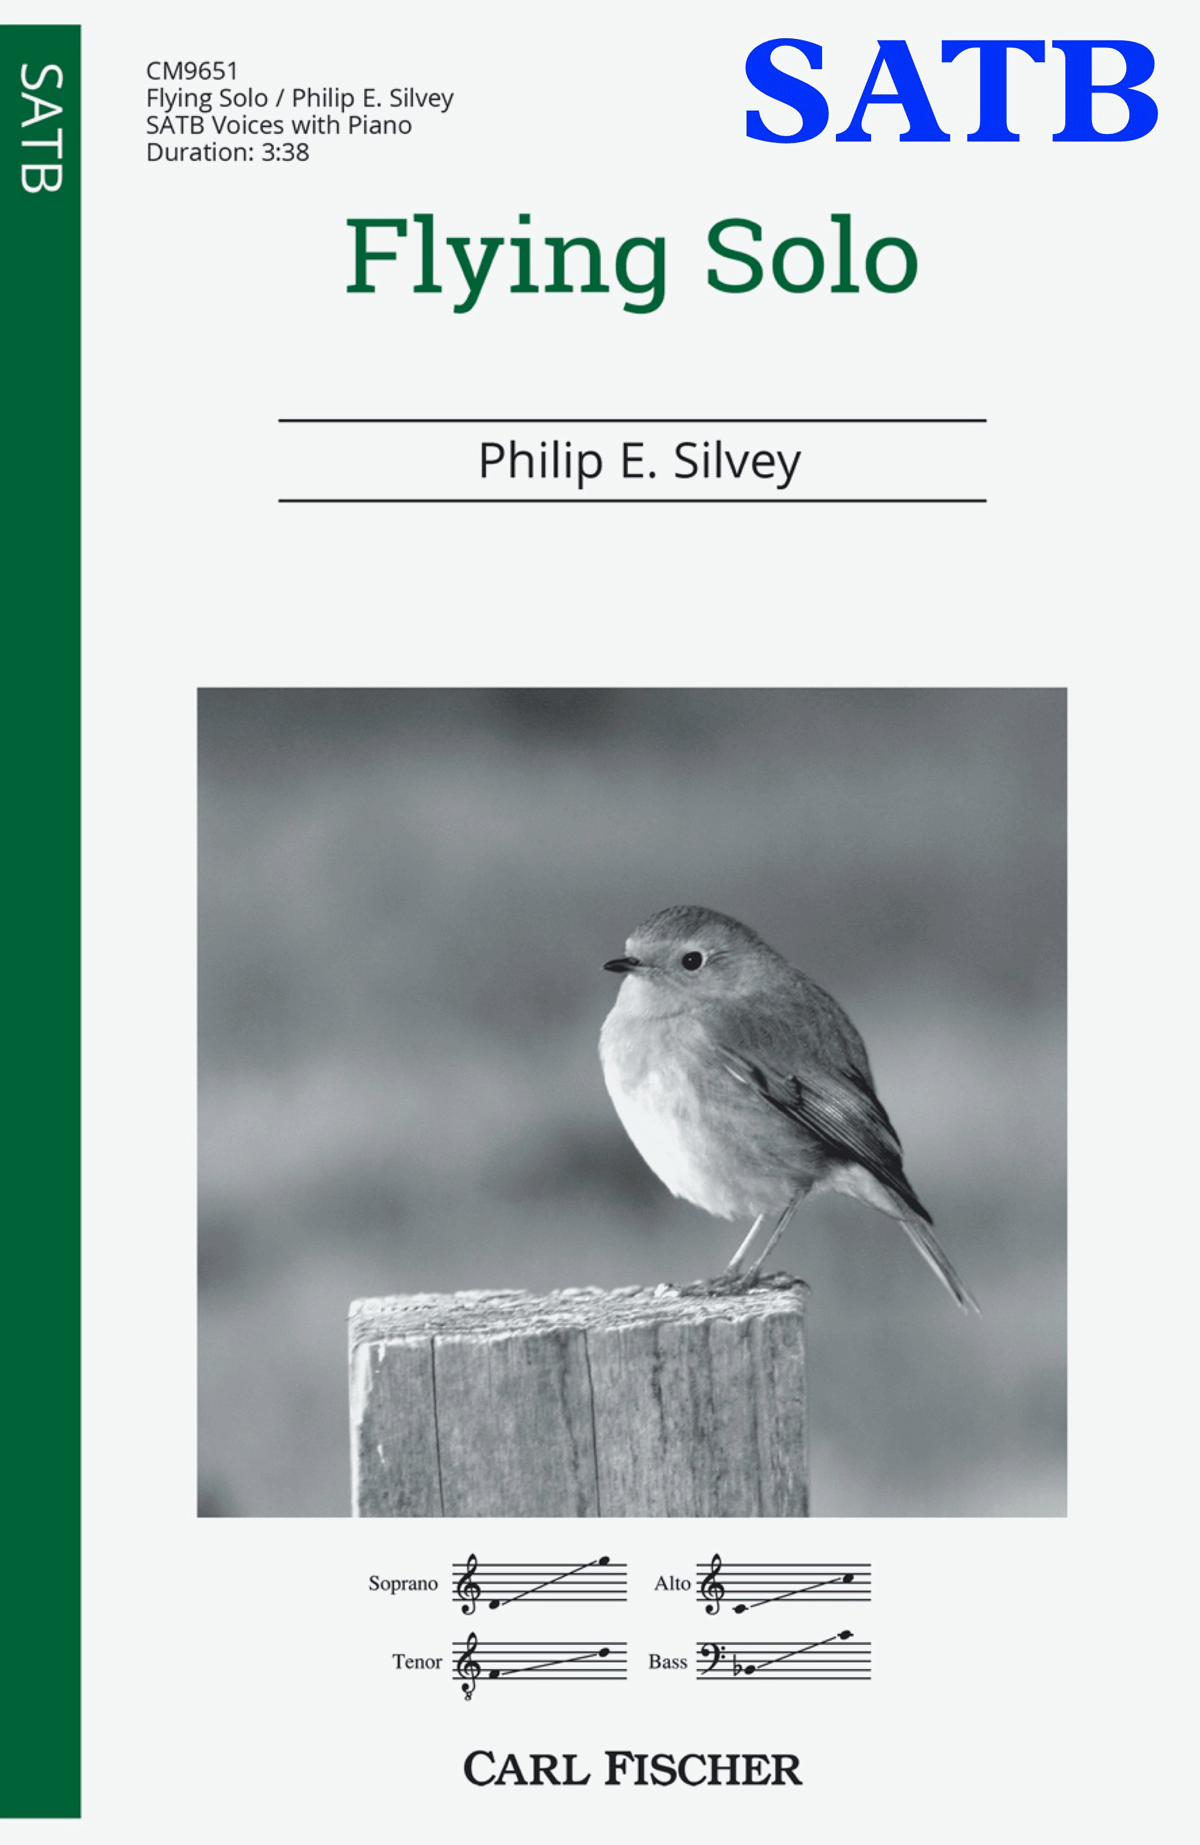 Flying Solo - SATB - choral music score - Philip Silvey